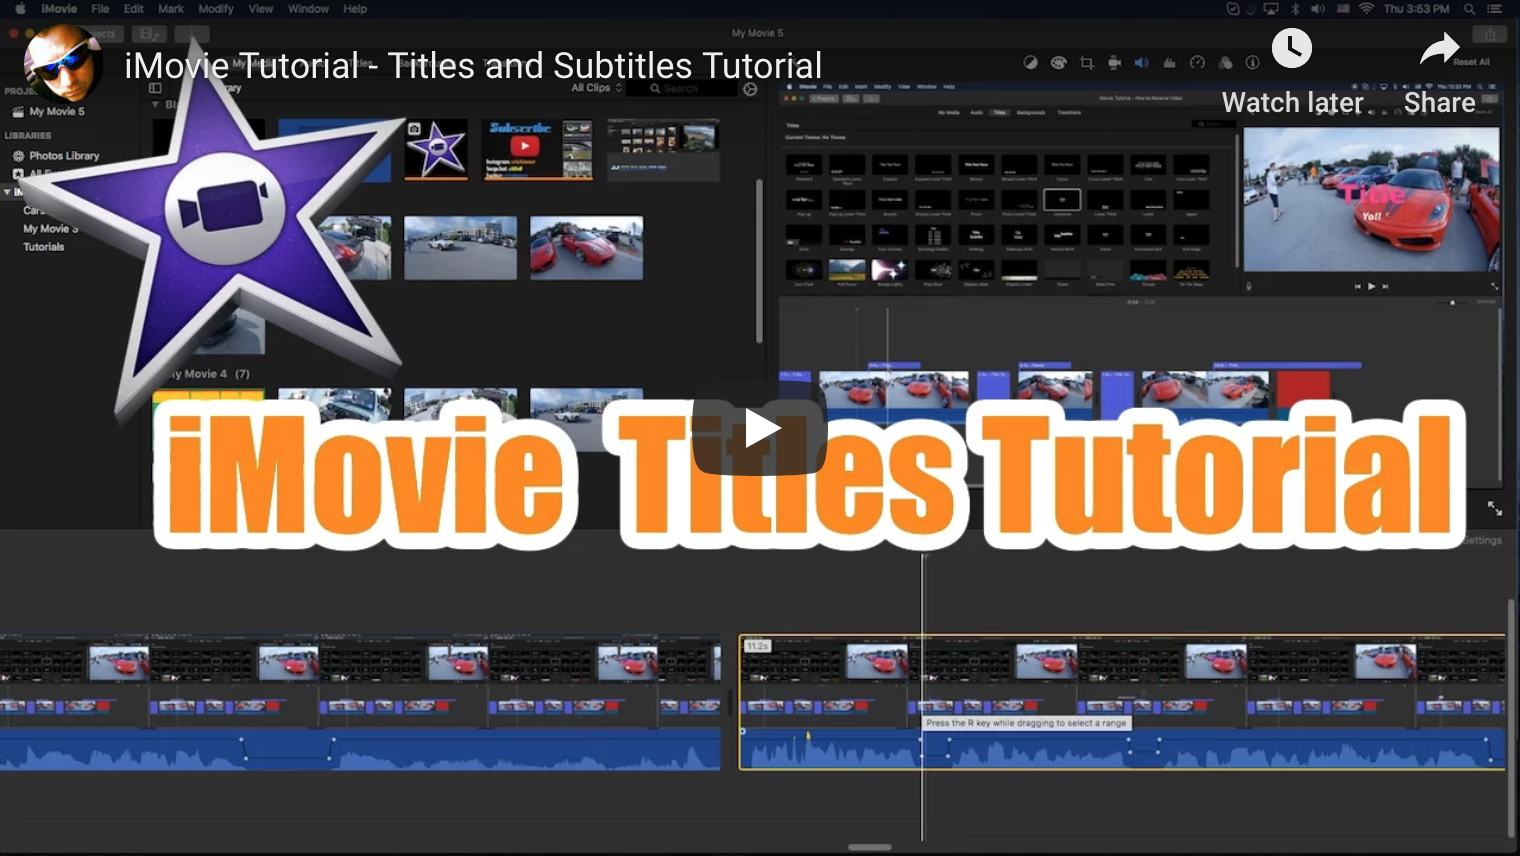 what is the most current version of imovie